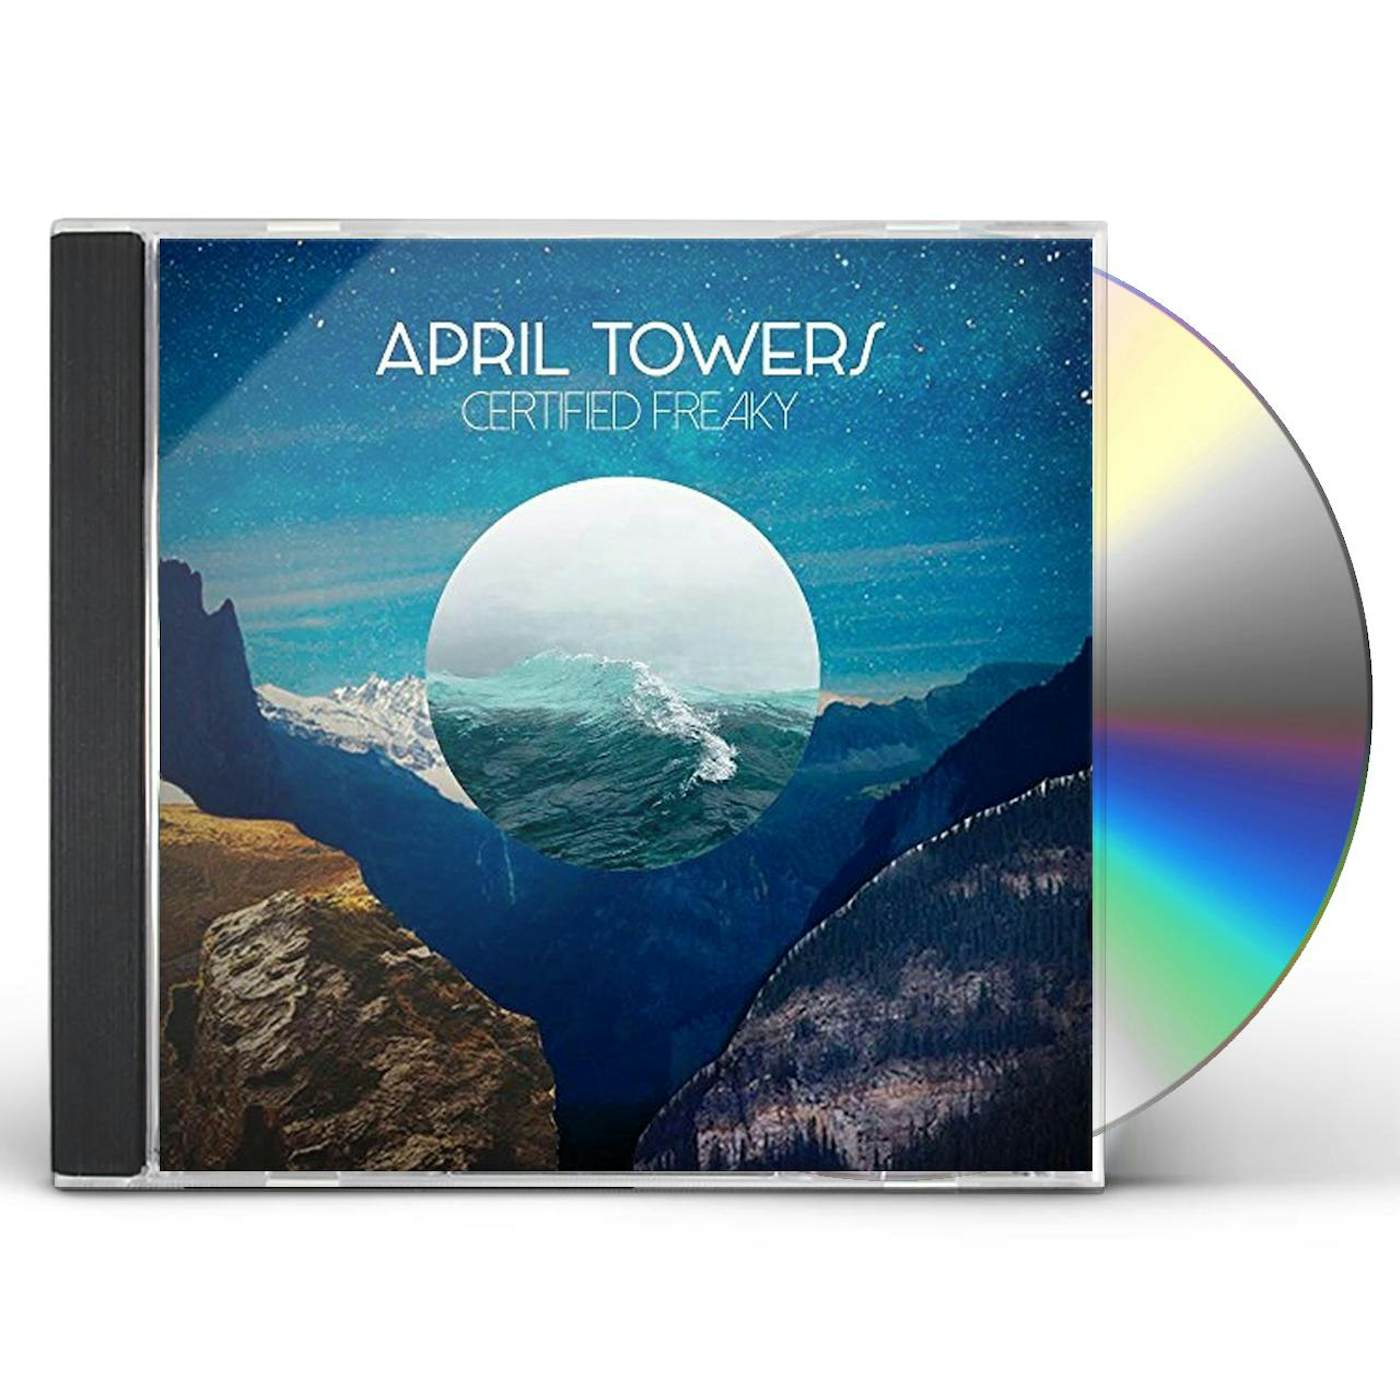 April Towers CERITIFED FREAKY CD